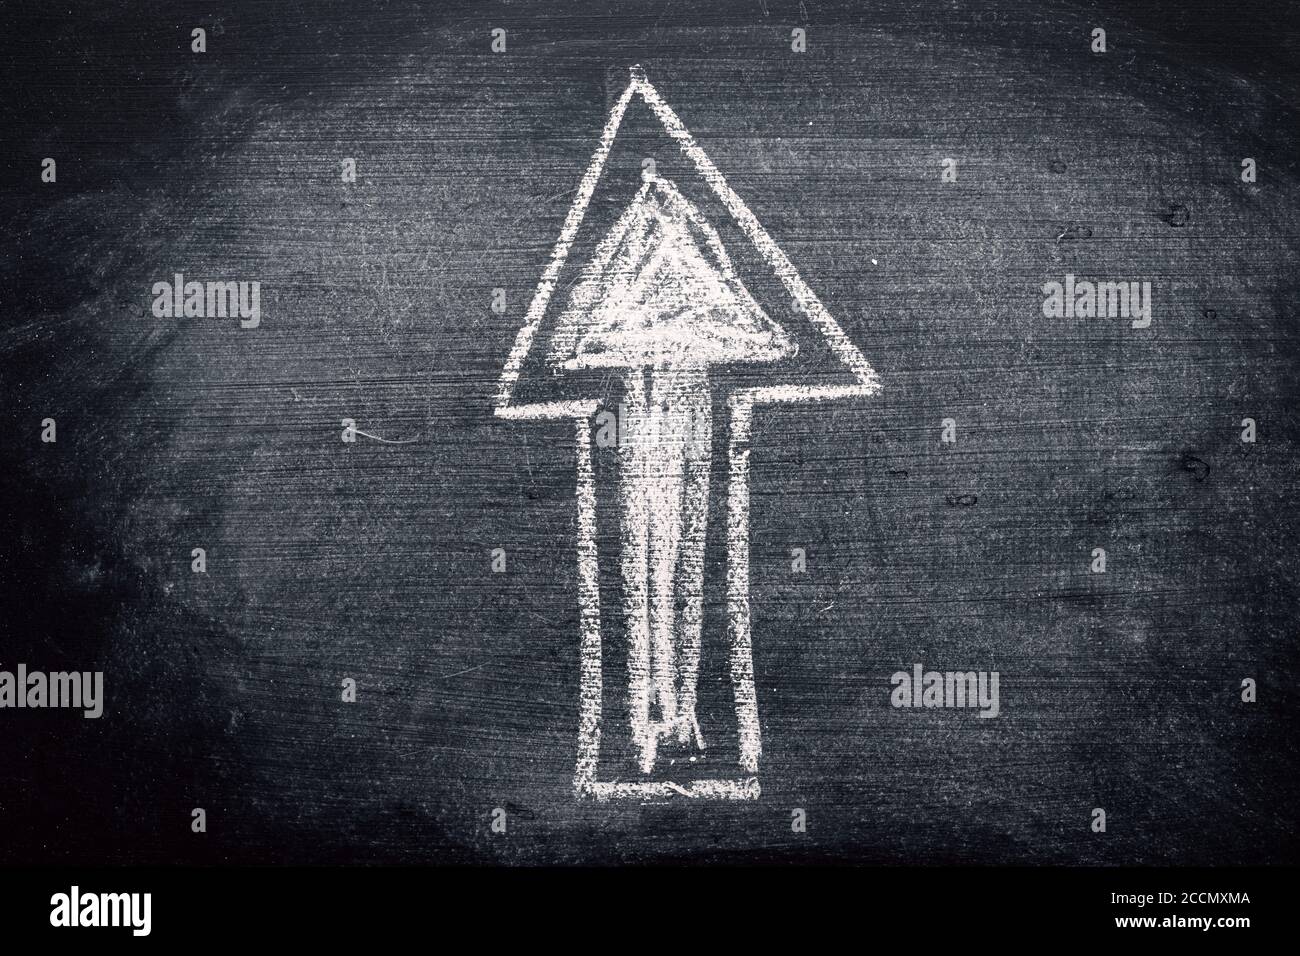 Arrow symbol, chalk on dirty blackboard. Concept of choosing the right direction in education. Stock Photo